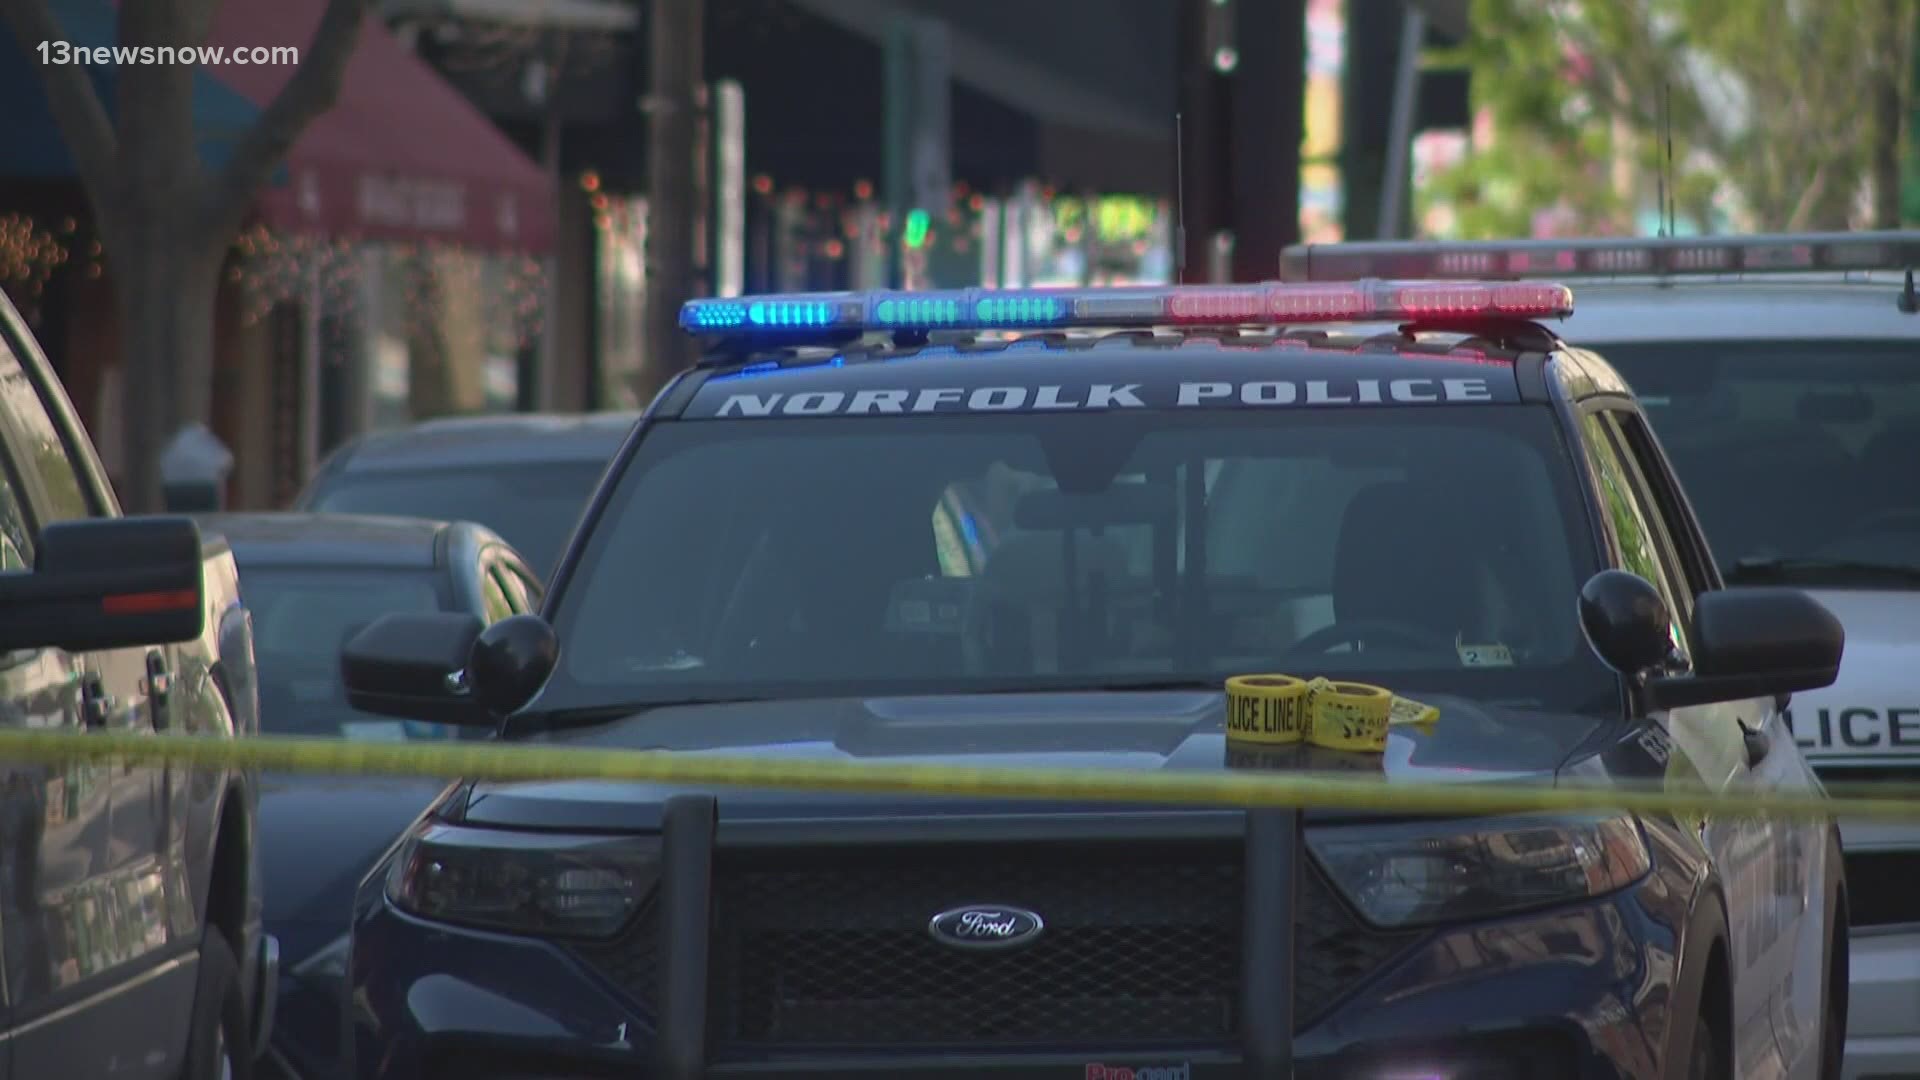 The Norfolk Police Department was investigating a double shooting on Granby Street Wednesday afternoon.